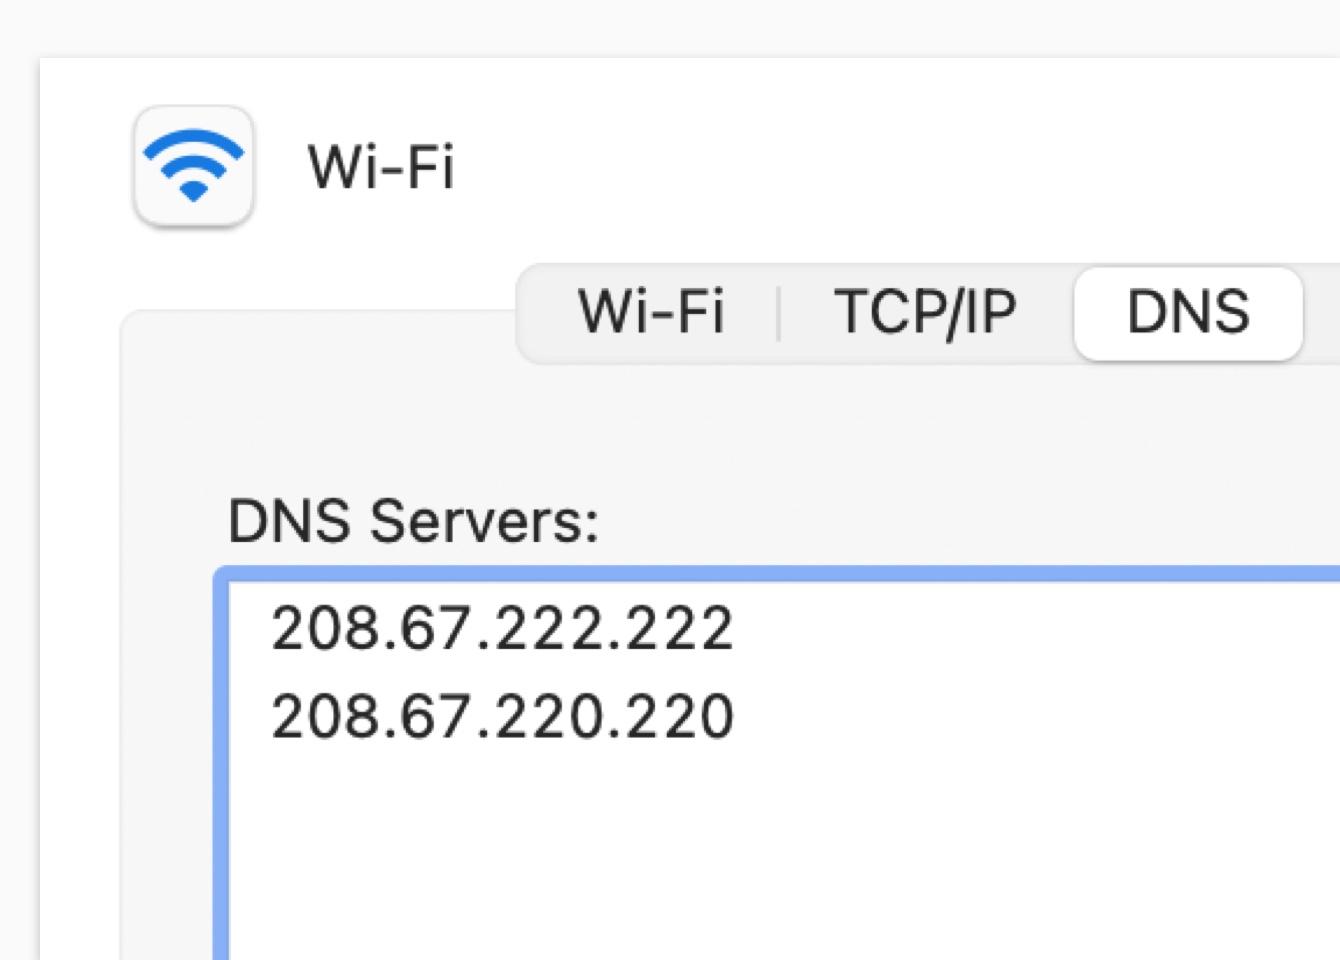 Enter the DNS server addresses of your choice.